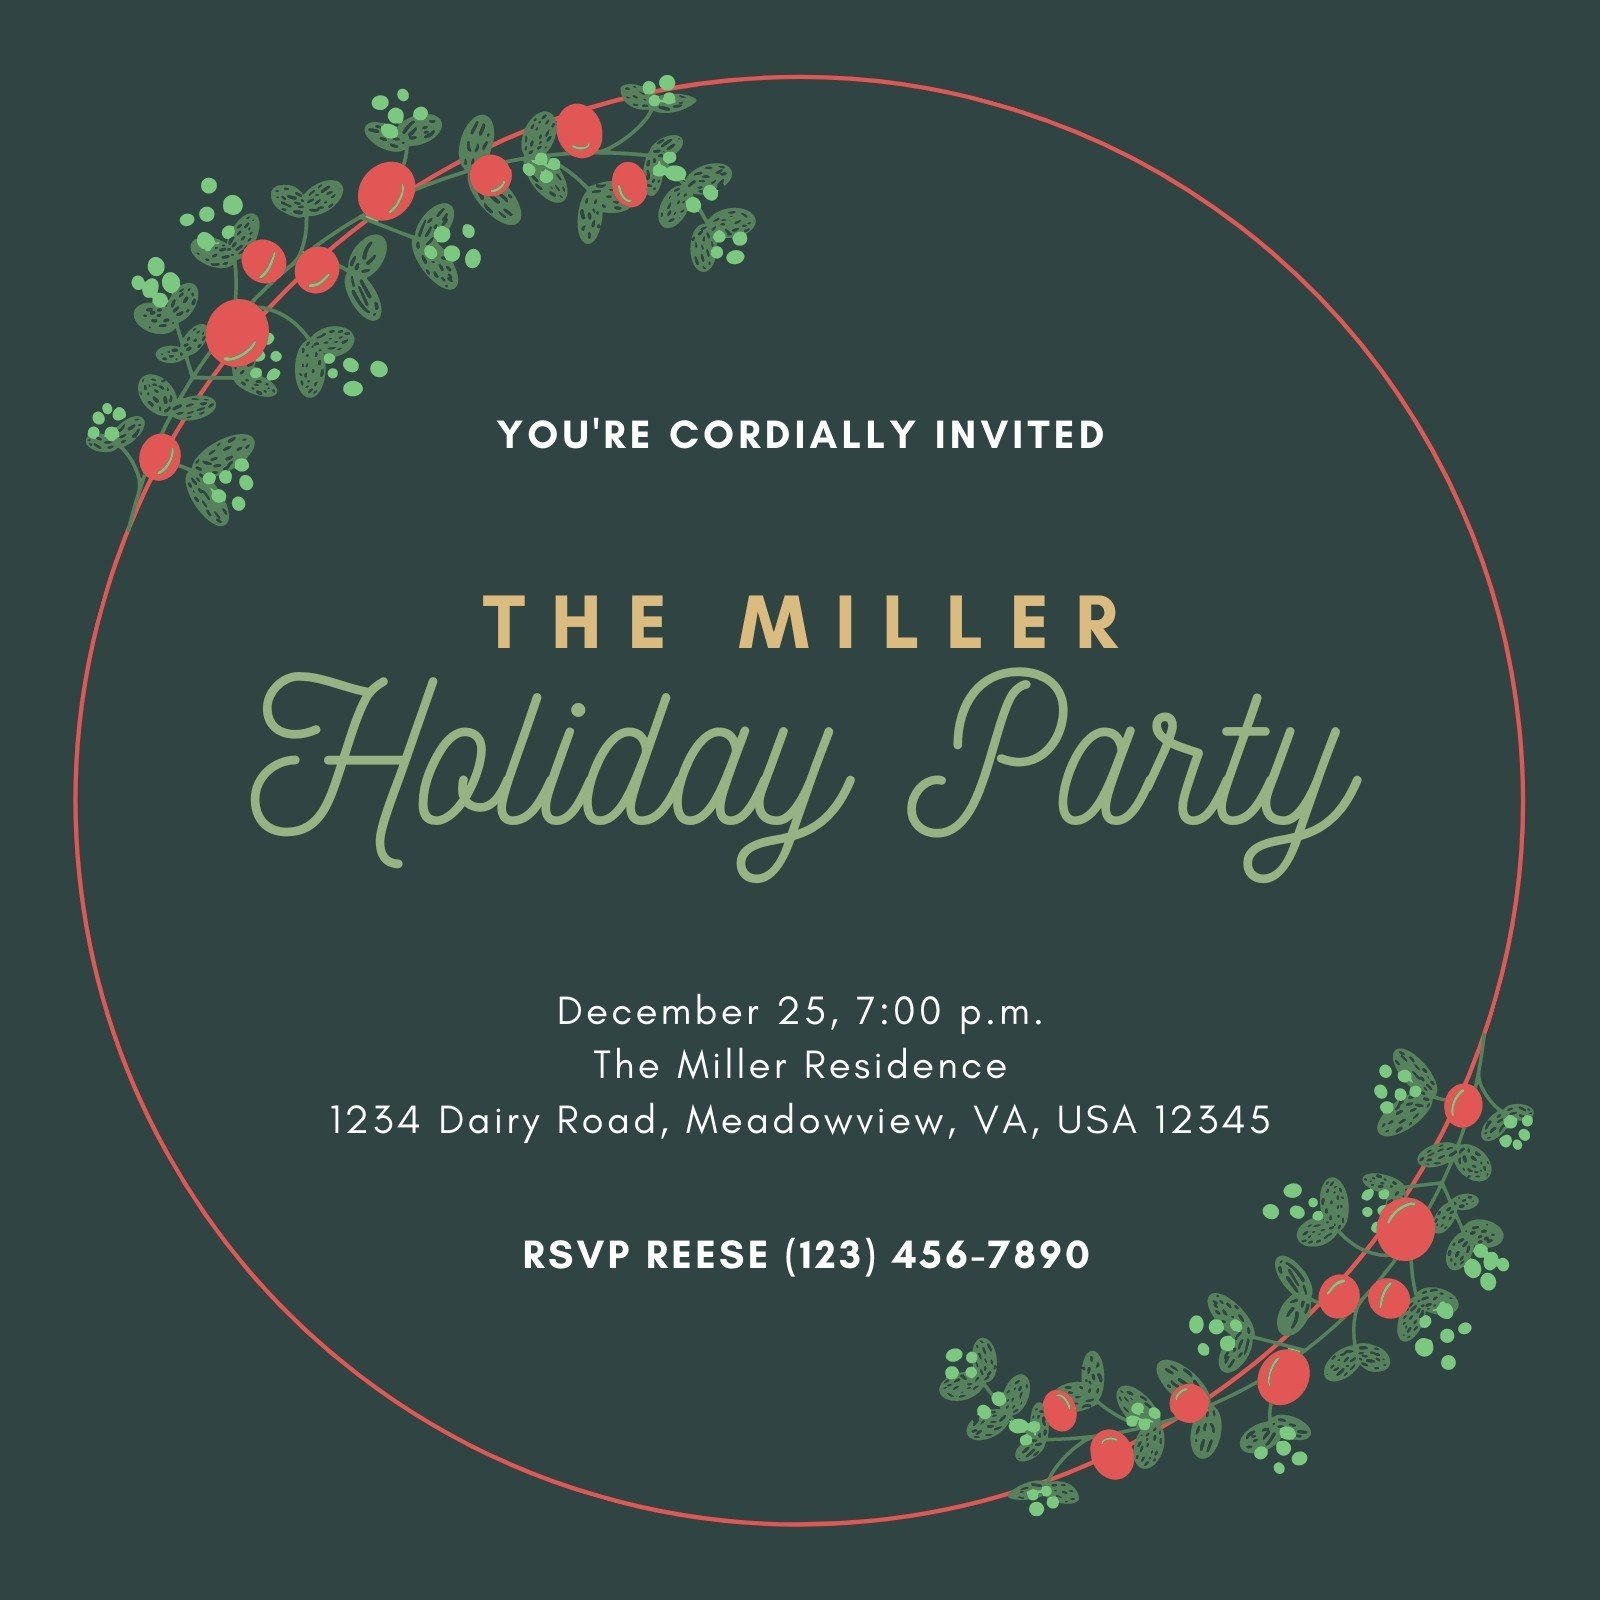 Christmas Holiday Party Invitation Family Party Invite New Year Party Invite Floral Green Red Winter  INSTANT DOWNLOAD Editable Invite